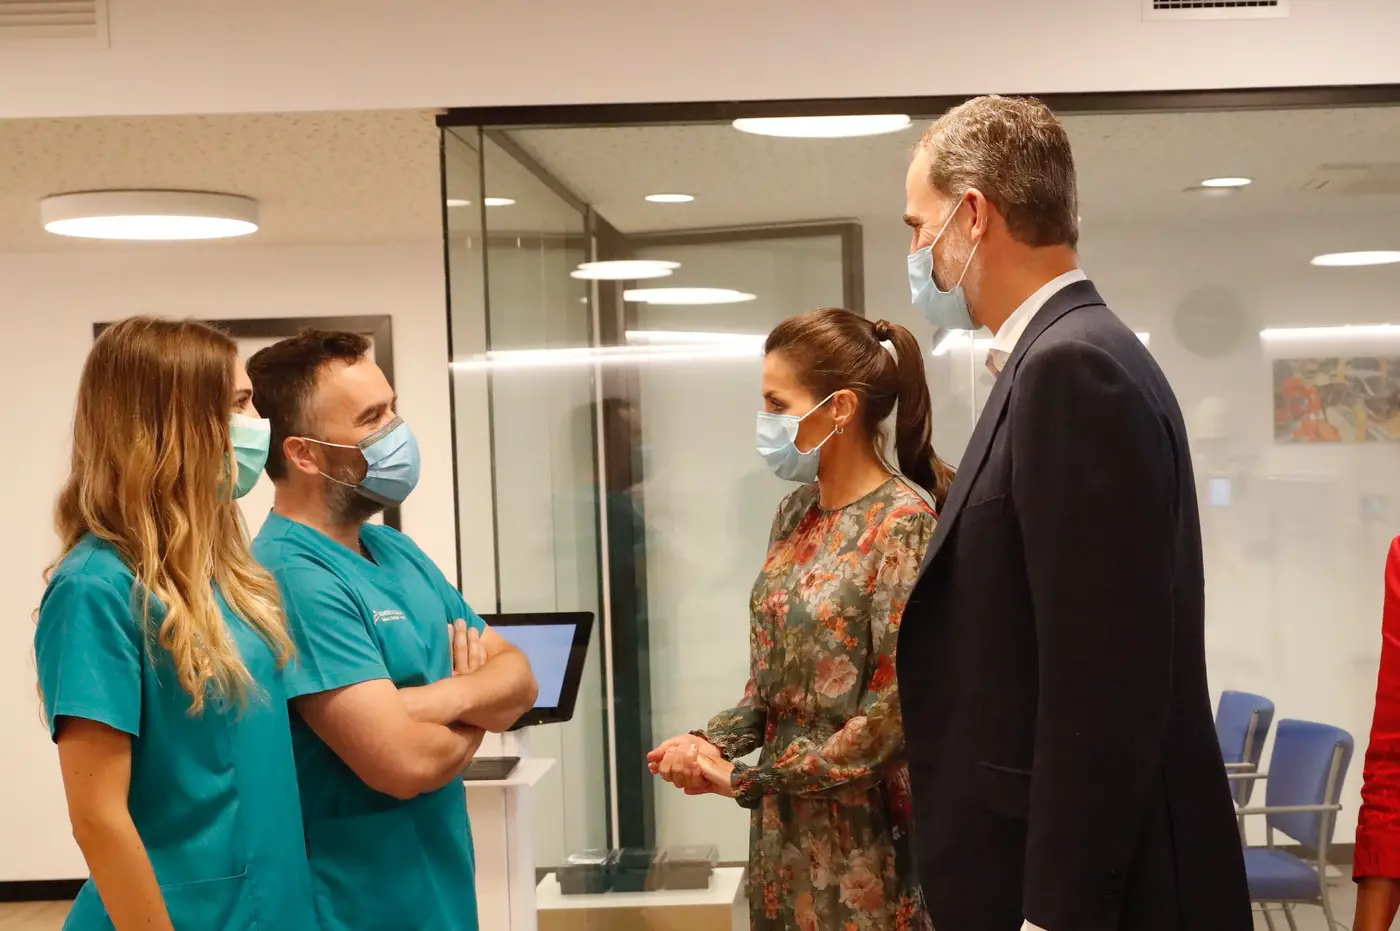 King Felipe and Queen Letizia met with the staff from the San Prudencio Foundation during their visit to the musculoskeletal treatment room